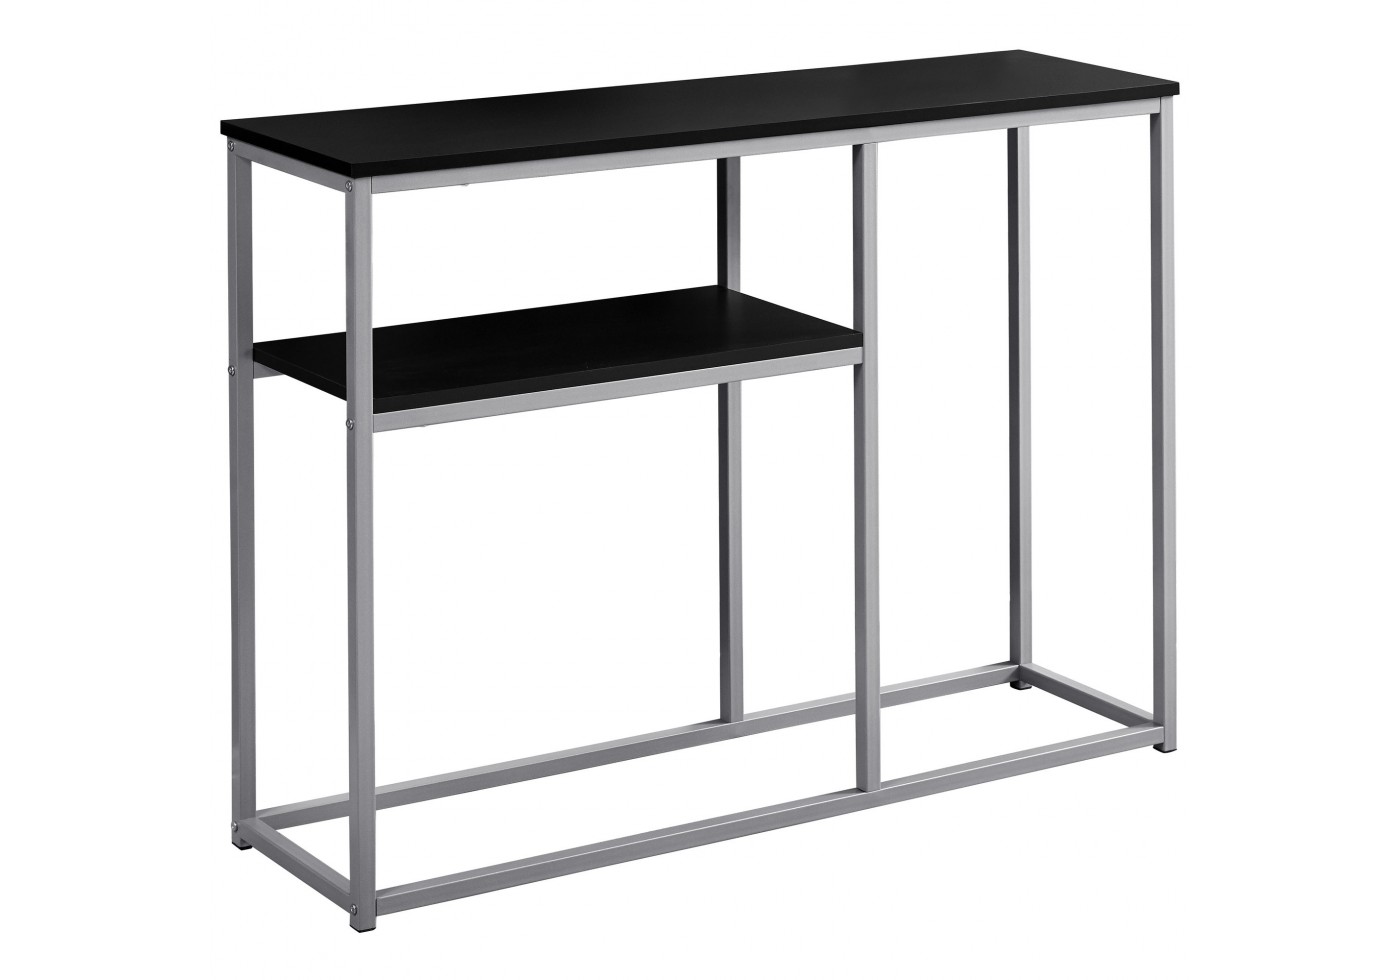 accent table black silver metal hall console dining room centerpiece ideas green cabinet kitchen sideboard wine stoppers target coffee with drawers ikea pool umbrella stand